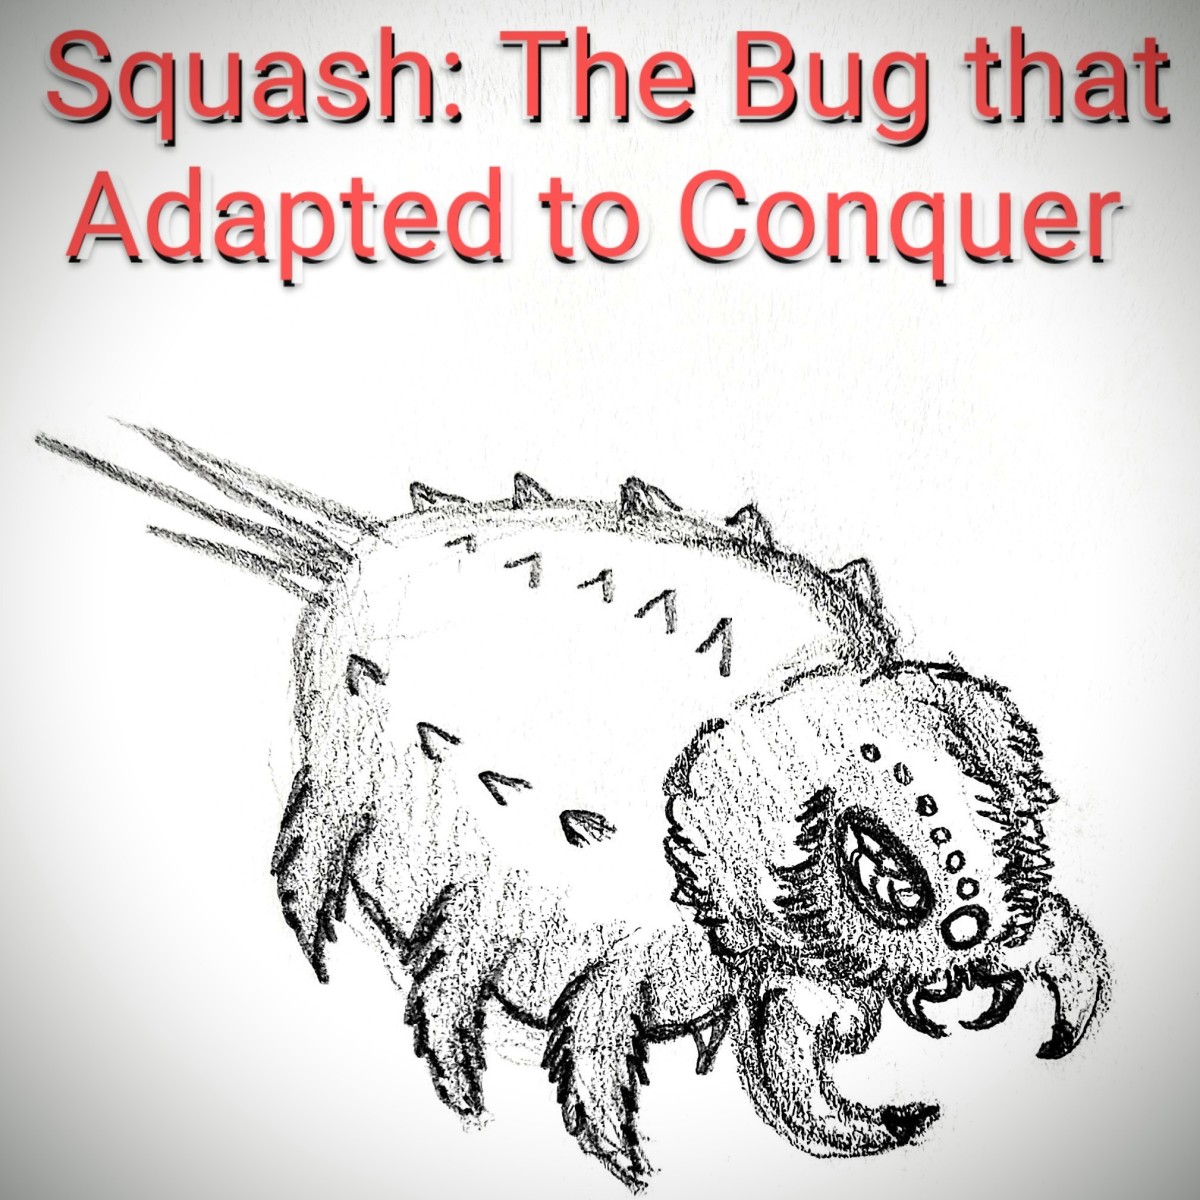 Squash: The Bug that Adapted to Conquer